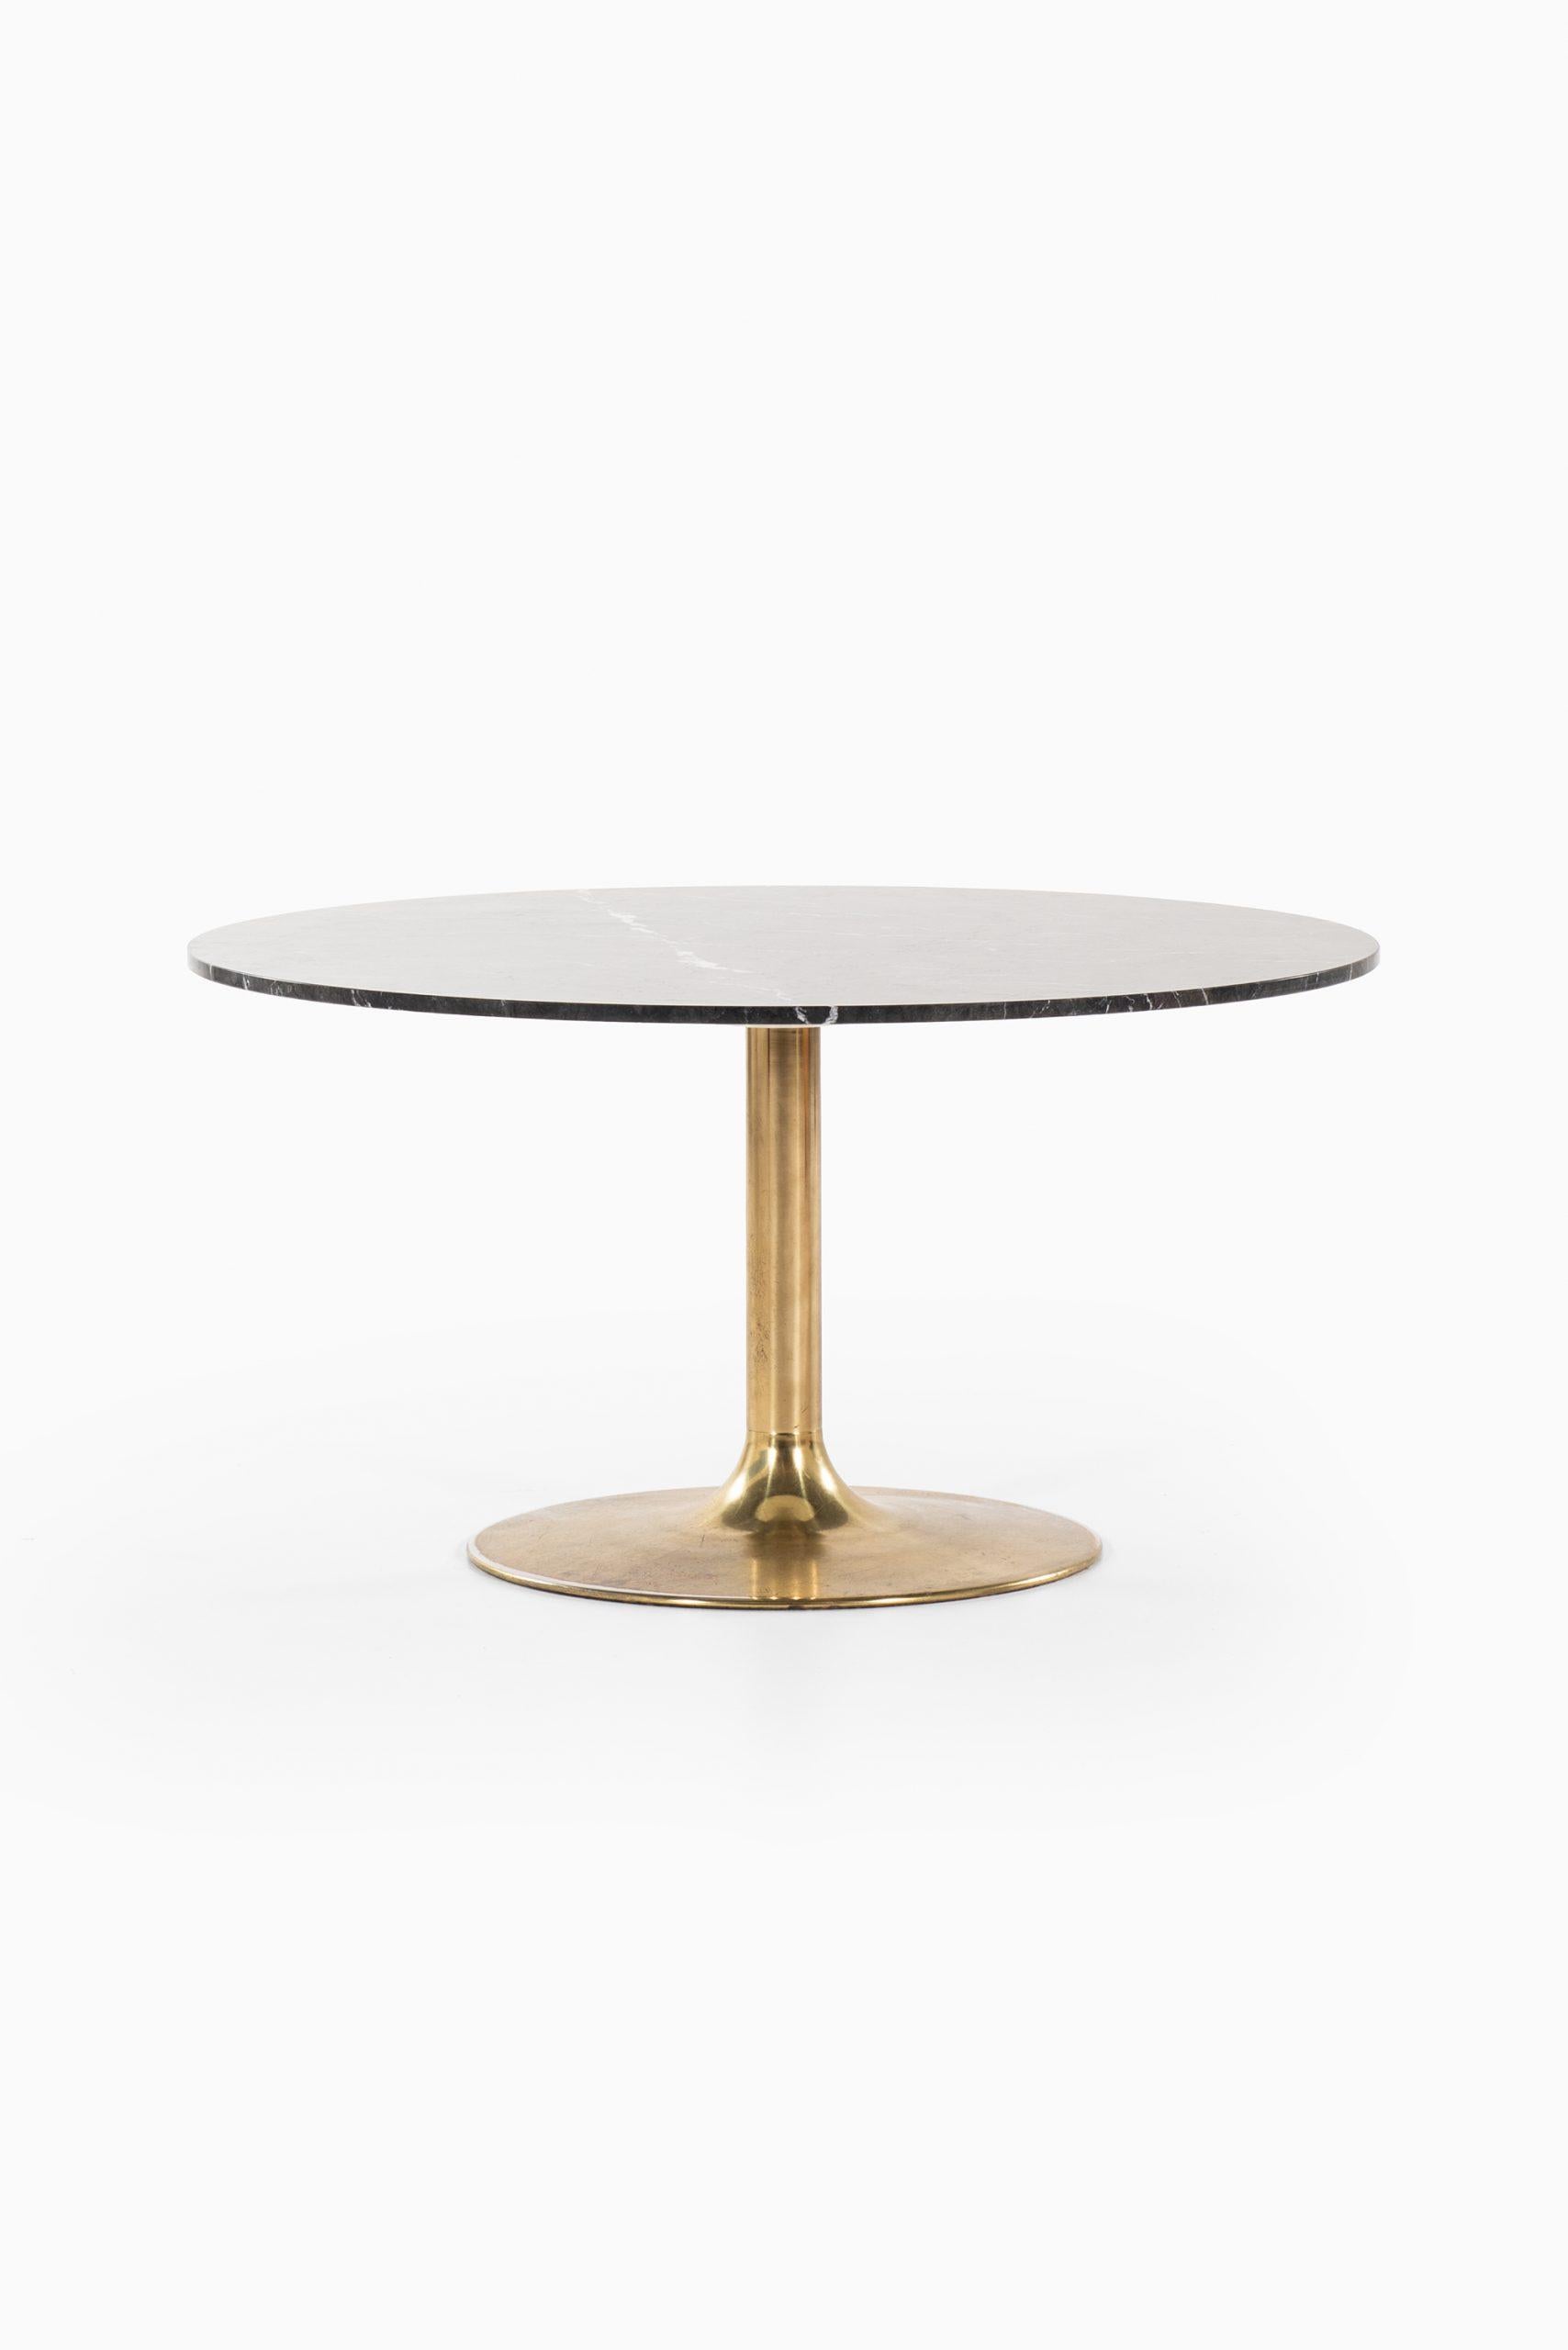 Very rare dining tables designed by Börje Johanson. Produced by Johanson Design in Sweden.